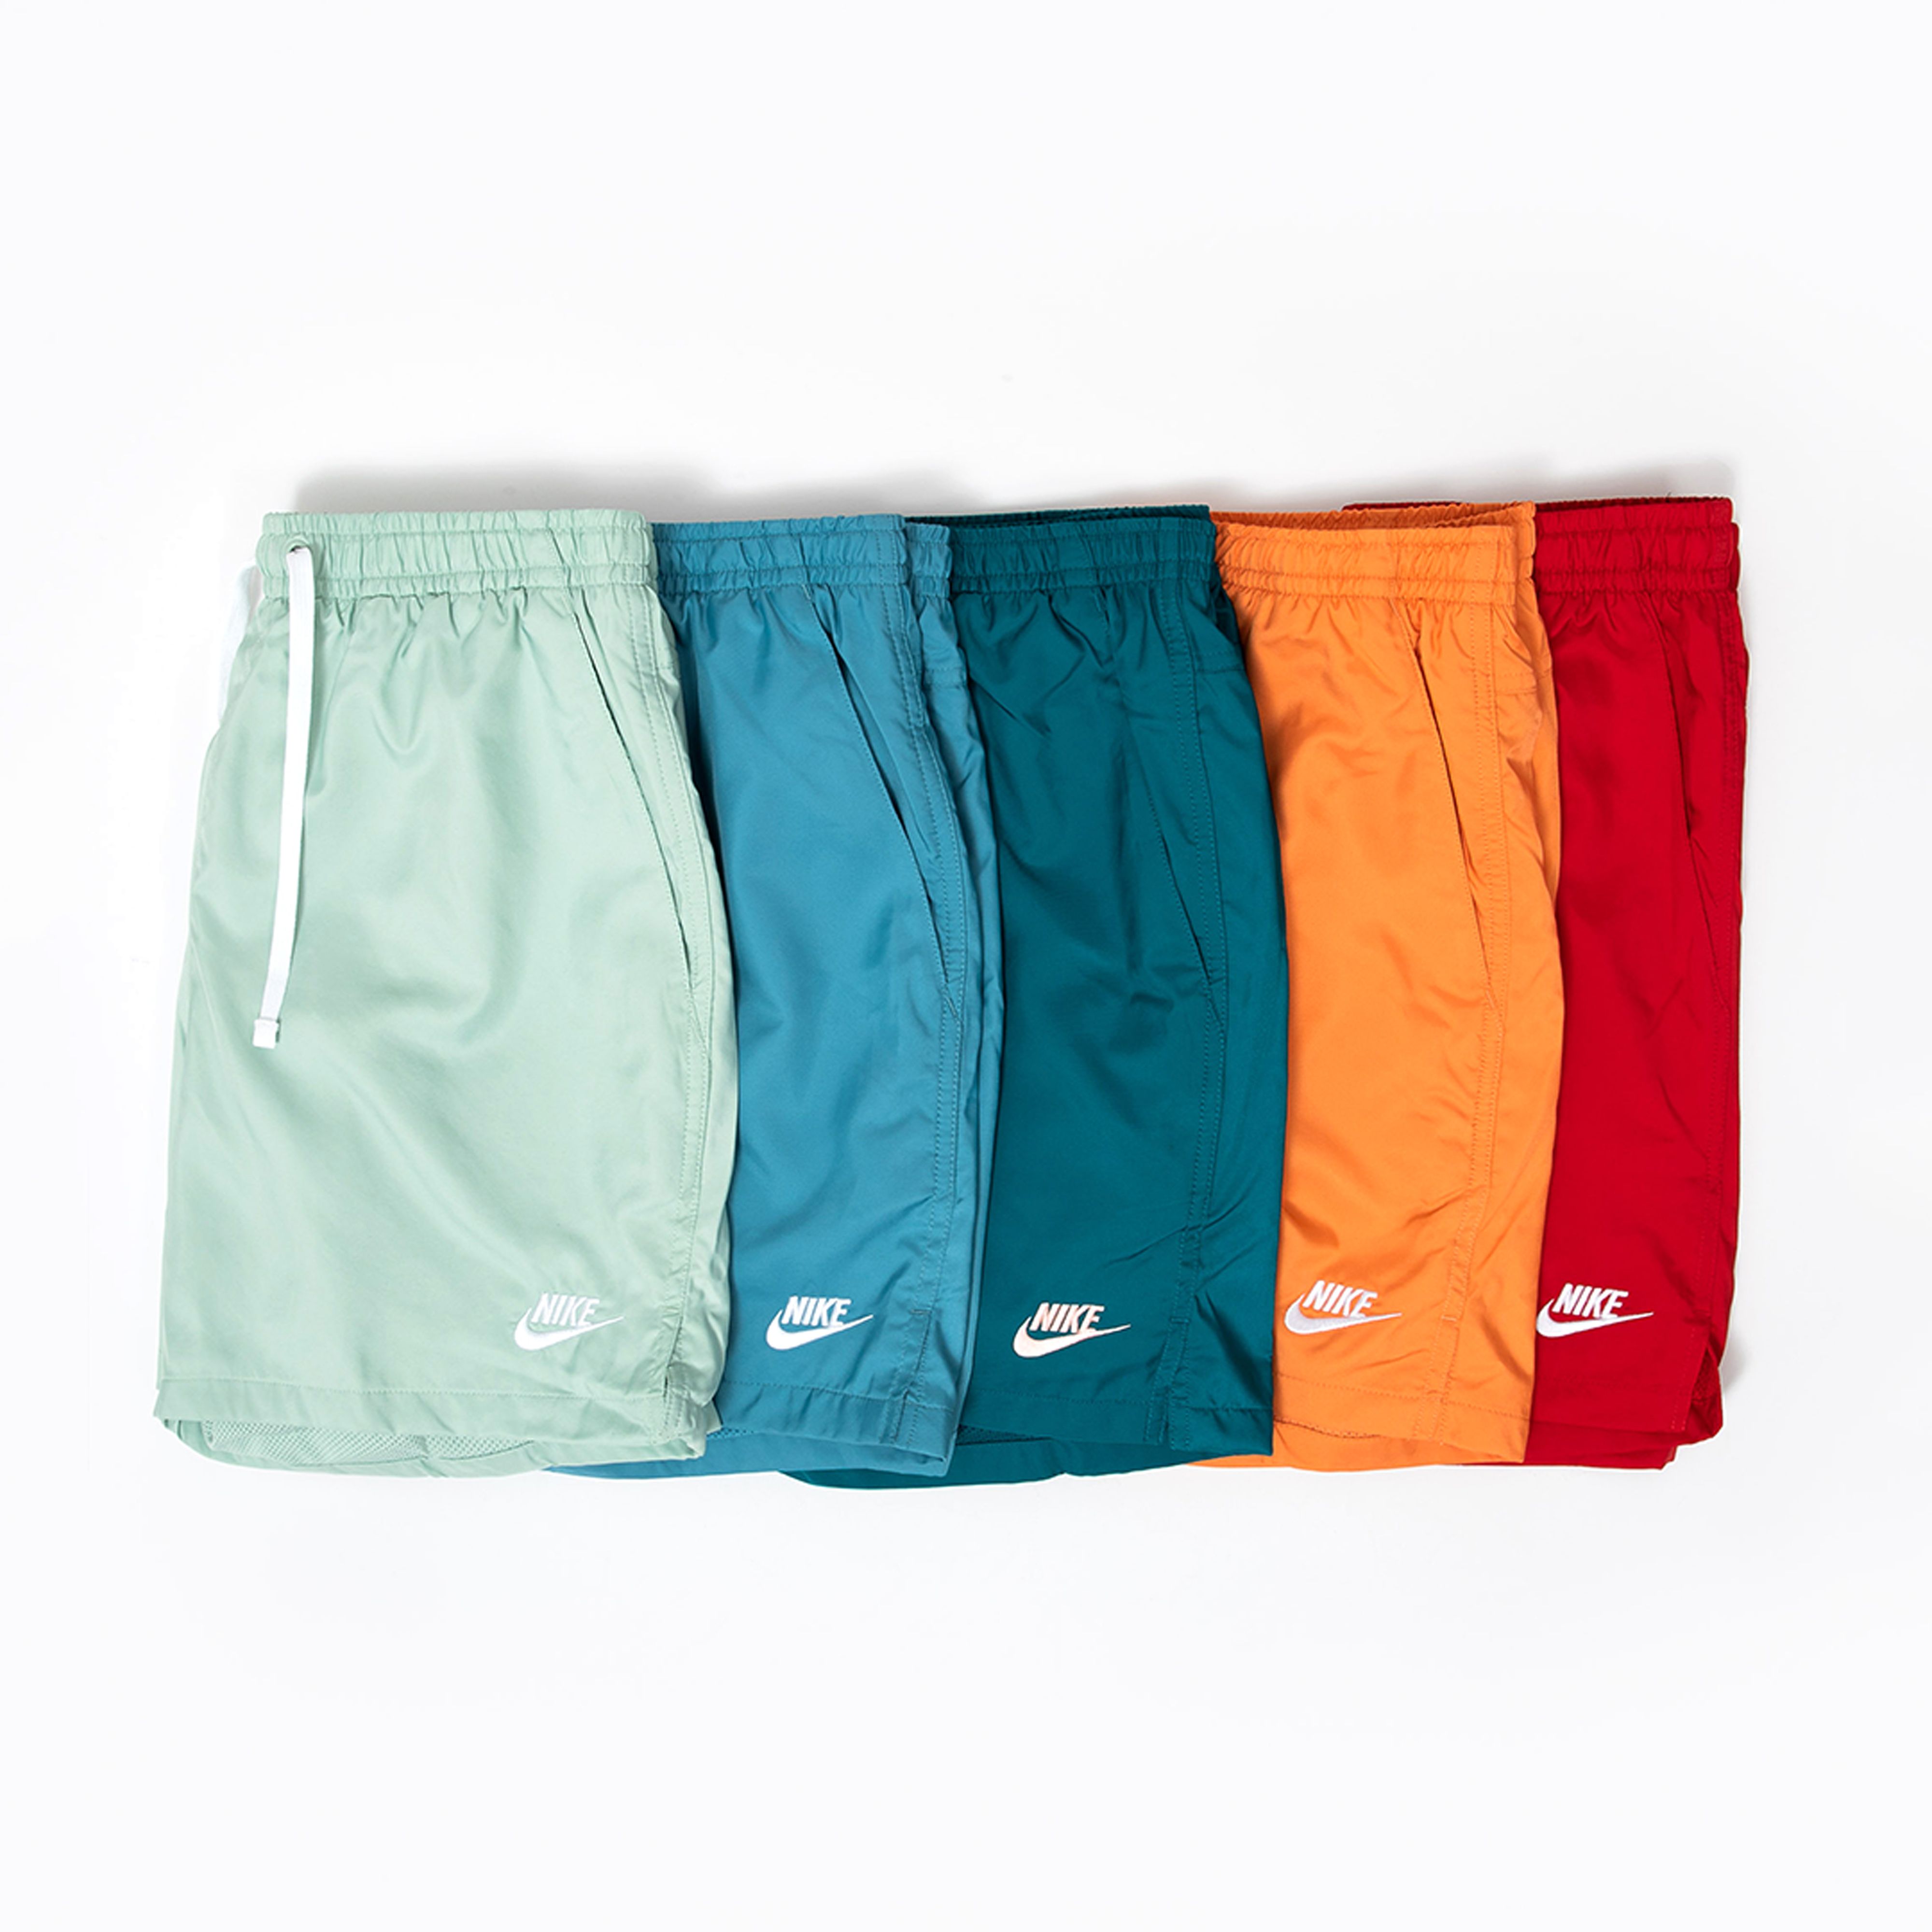 Fatal Abuelos visitantes puede Titolo on Twitter: "new colors 🎨 Woven Shorts by Nike Sportswear.⁠⠀ Take  Your pick ➡️ ⁠ https://t.co/IyKXM6rKuZ small - to x-large.⁠⠀ styles codes  🔎 AR2382-321 / 424 / 379 / 871 and